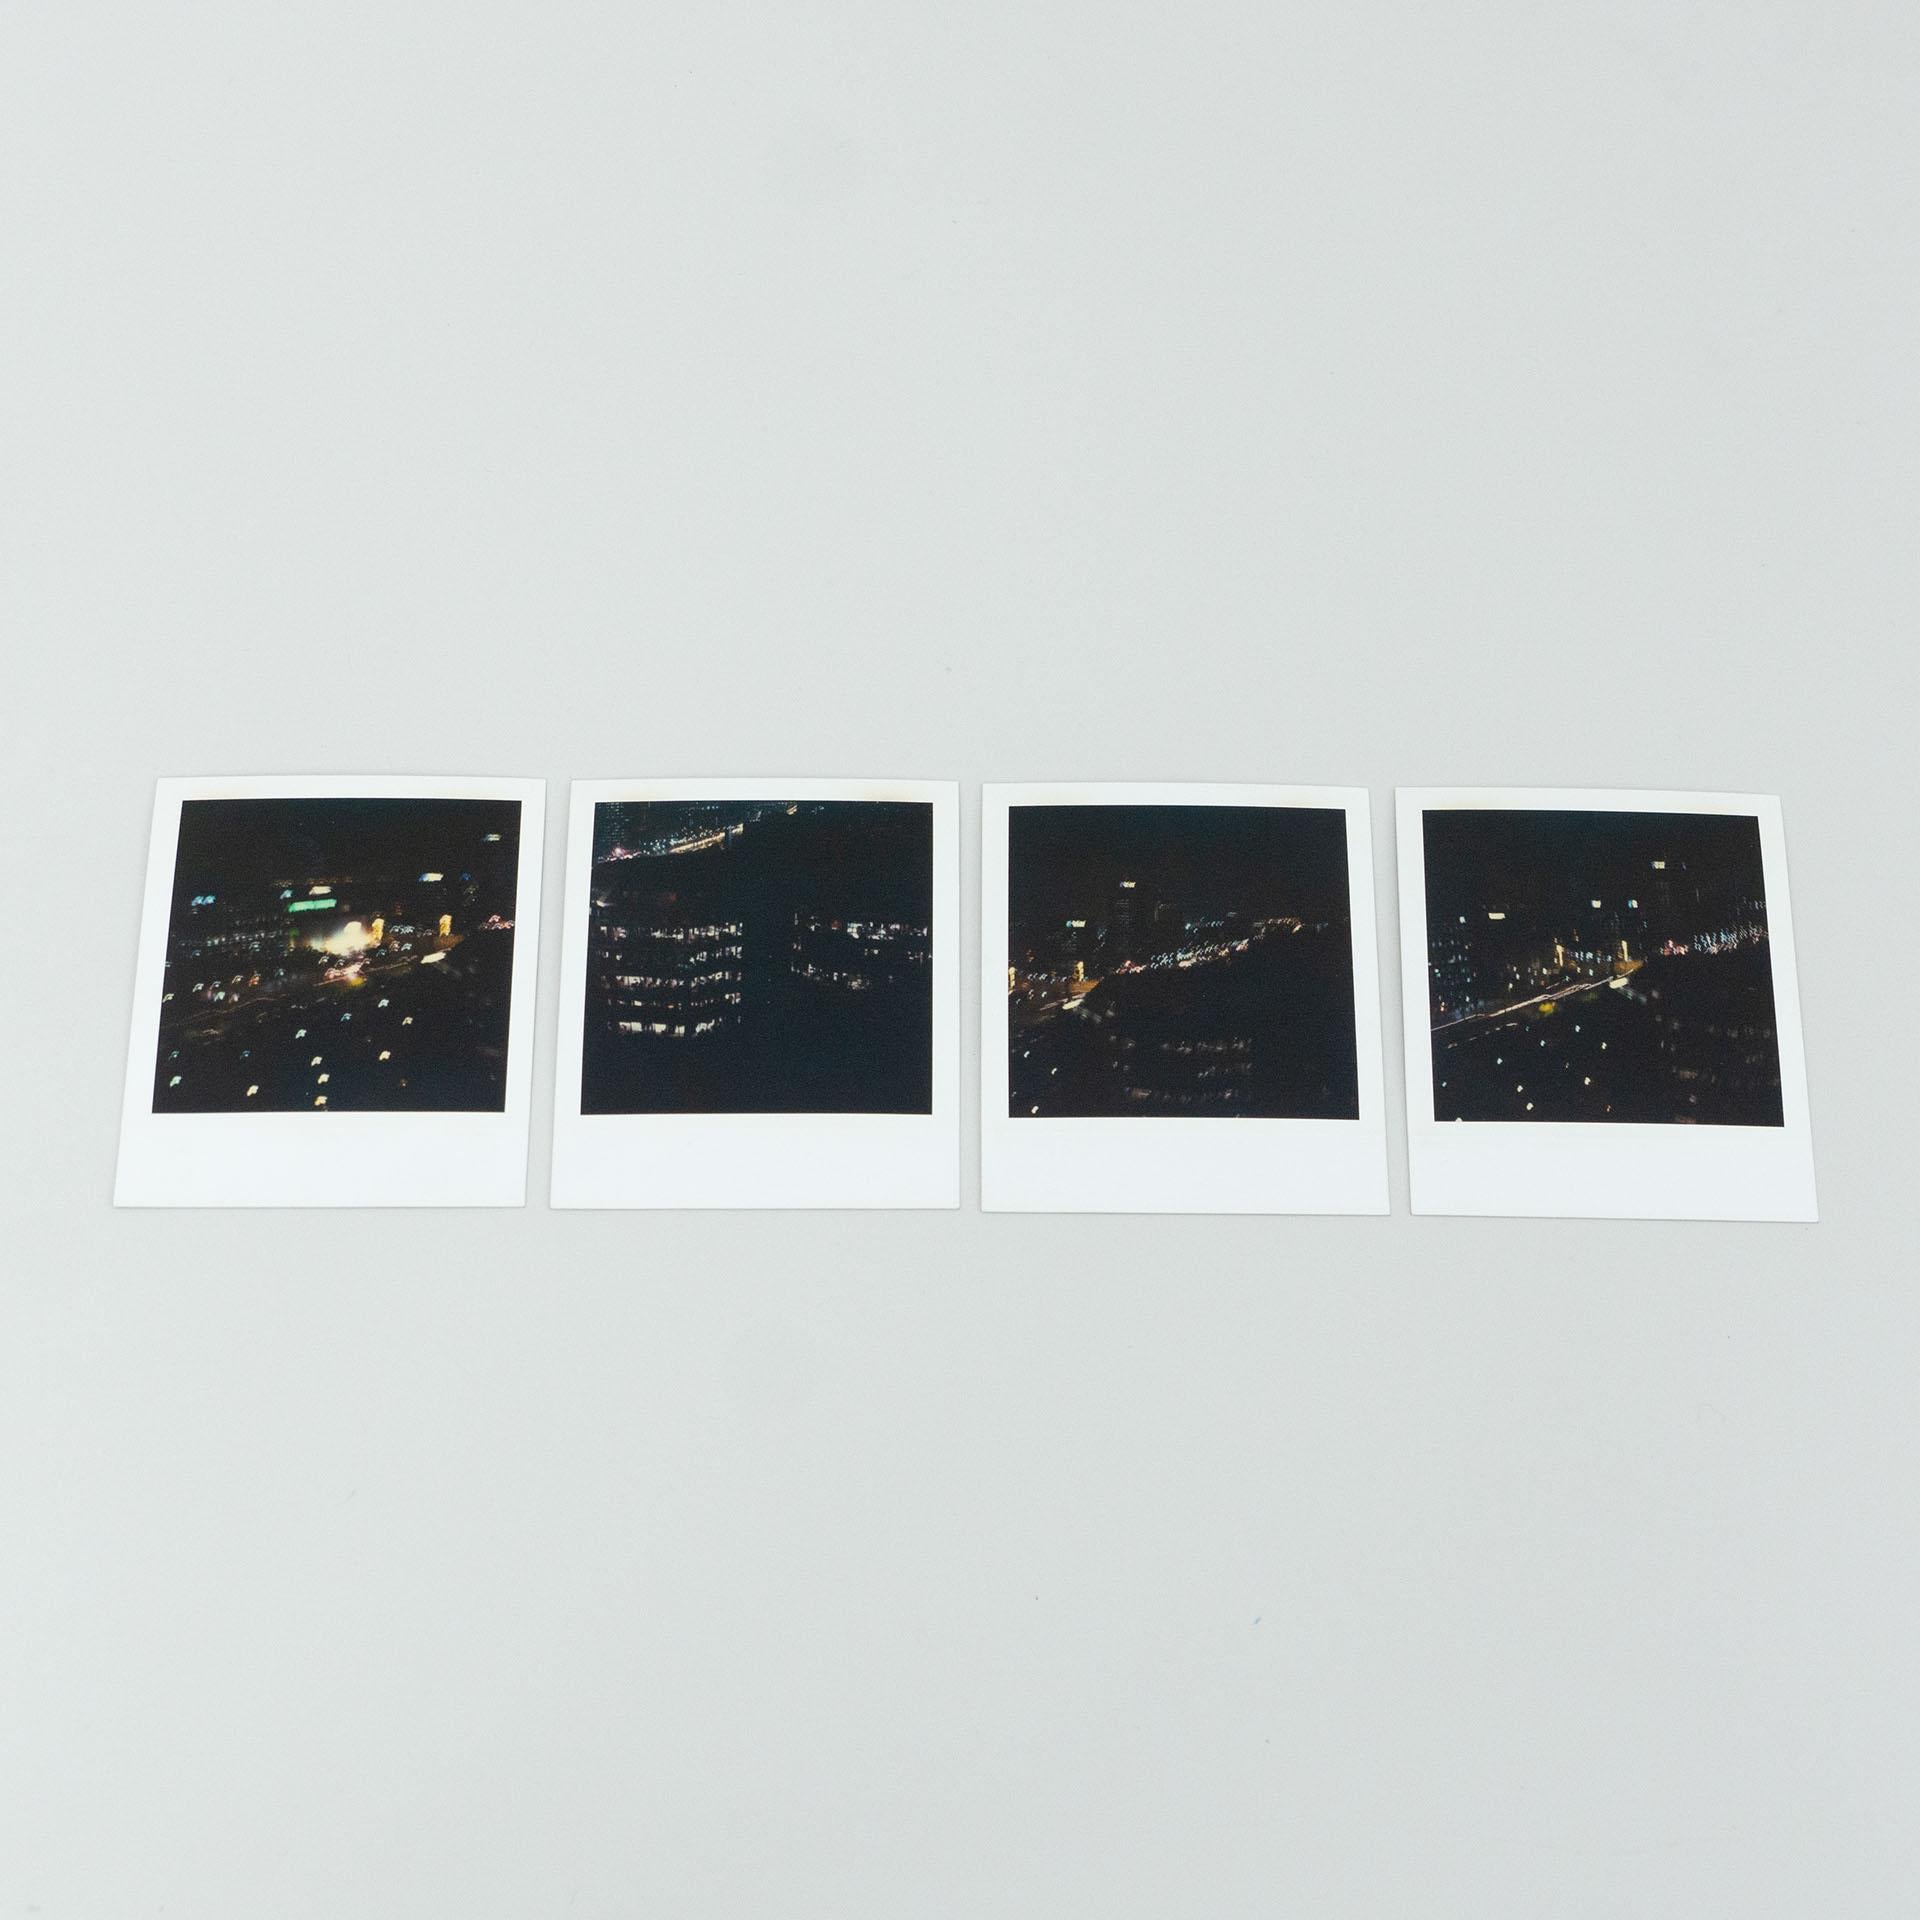 Set of Polaroid photographs by Miquel Arnal.

In original condition, with minor wear consistent with age and use, preserving a beautiful patina.

Material:
Photographic paper

Dimensions (each one):
D 0.1 cm x W 9 cm x H 11 cm

About the